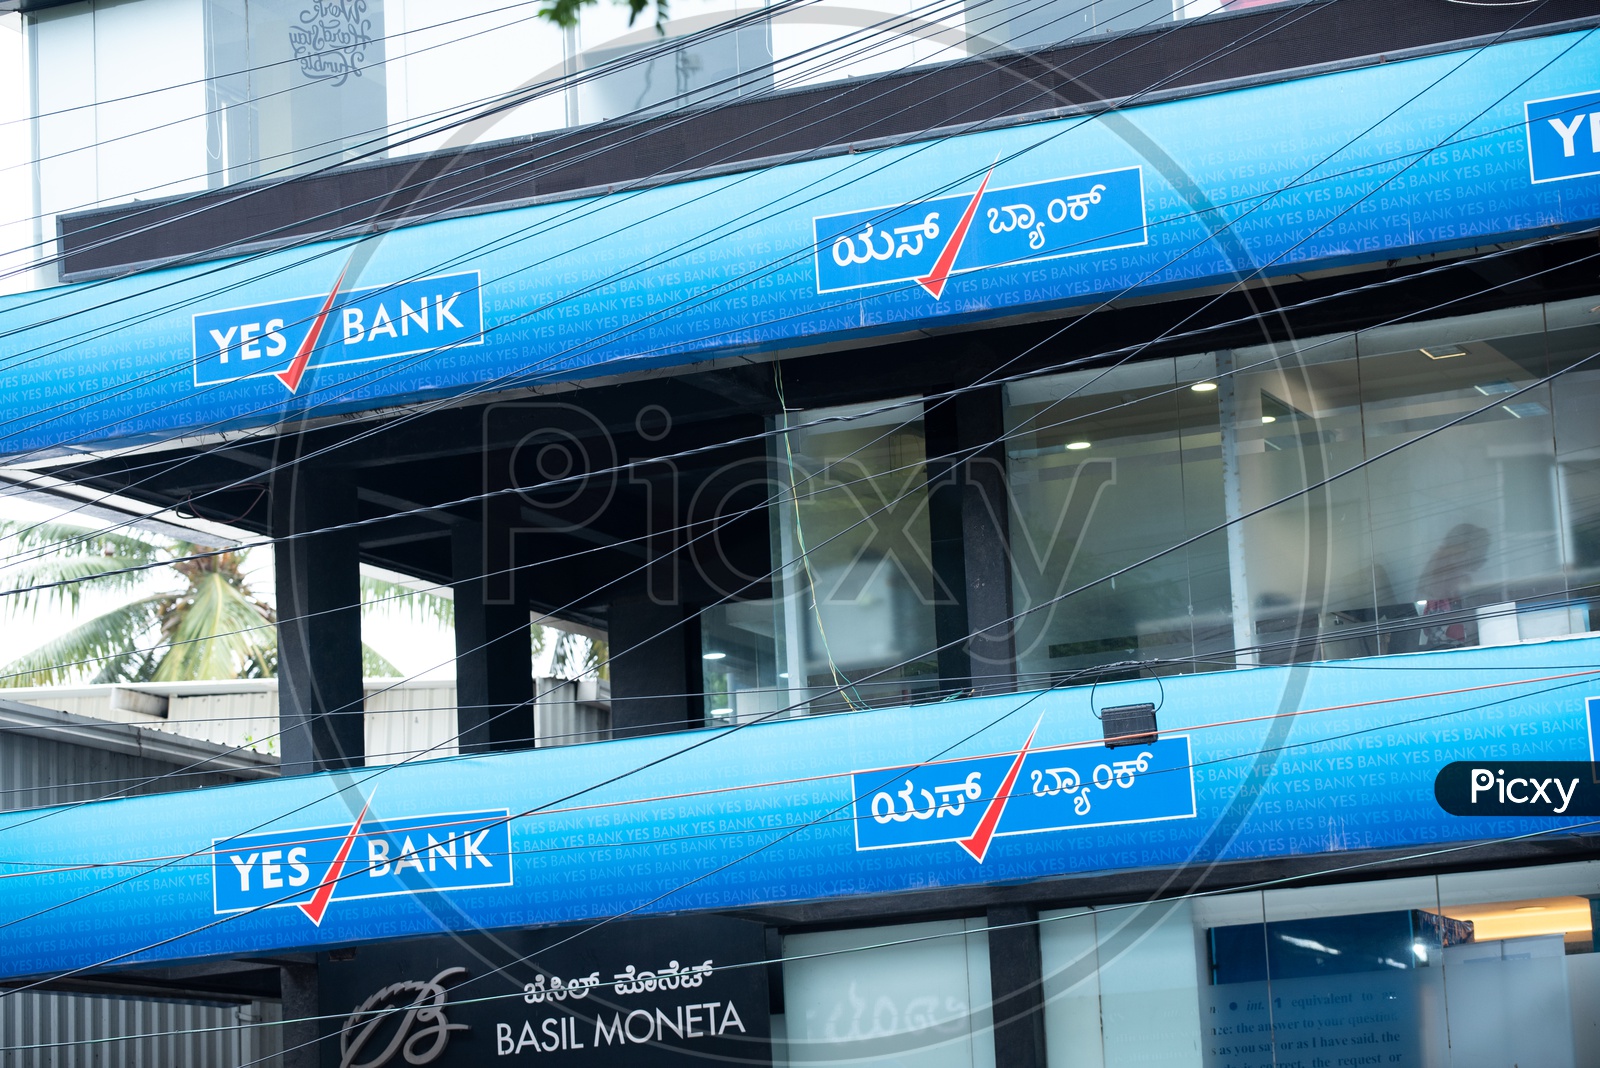 Yes Bank, India's fourth largest private sector bank